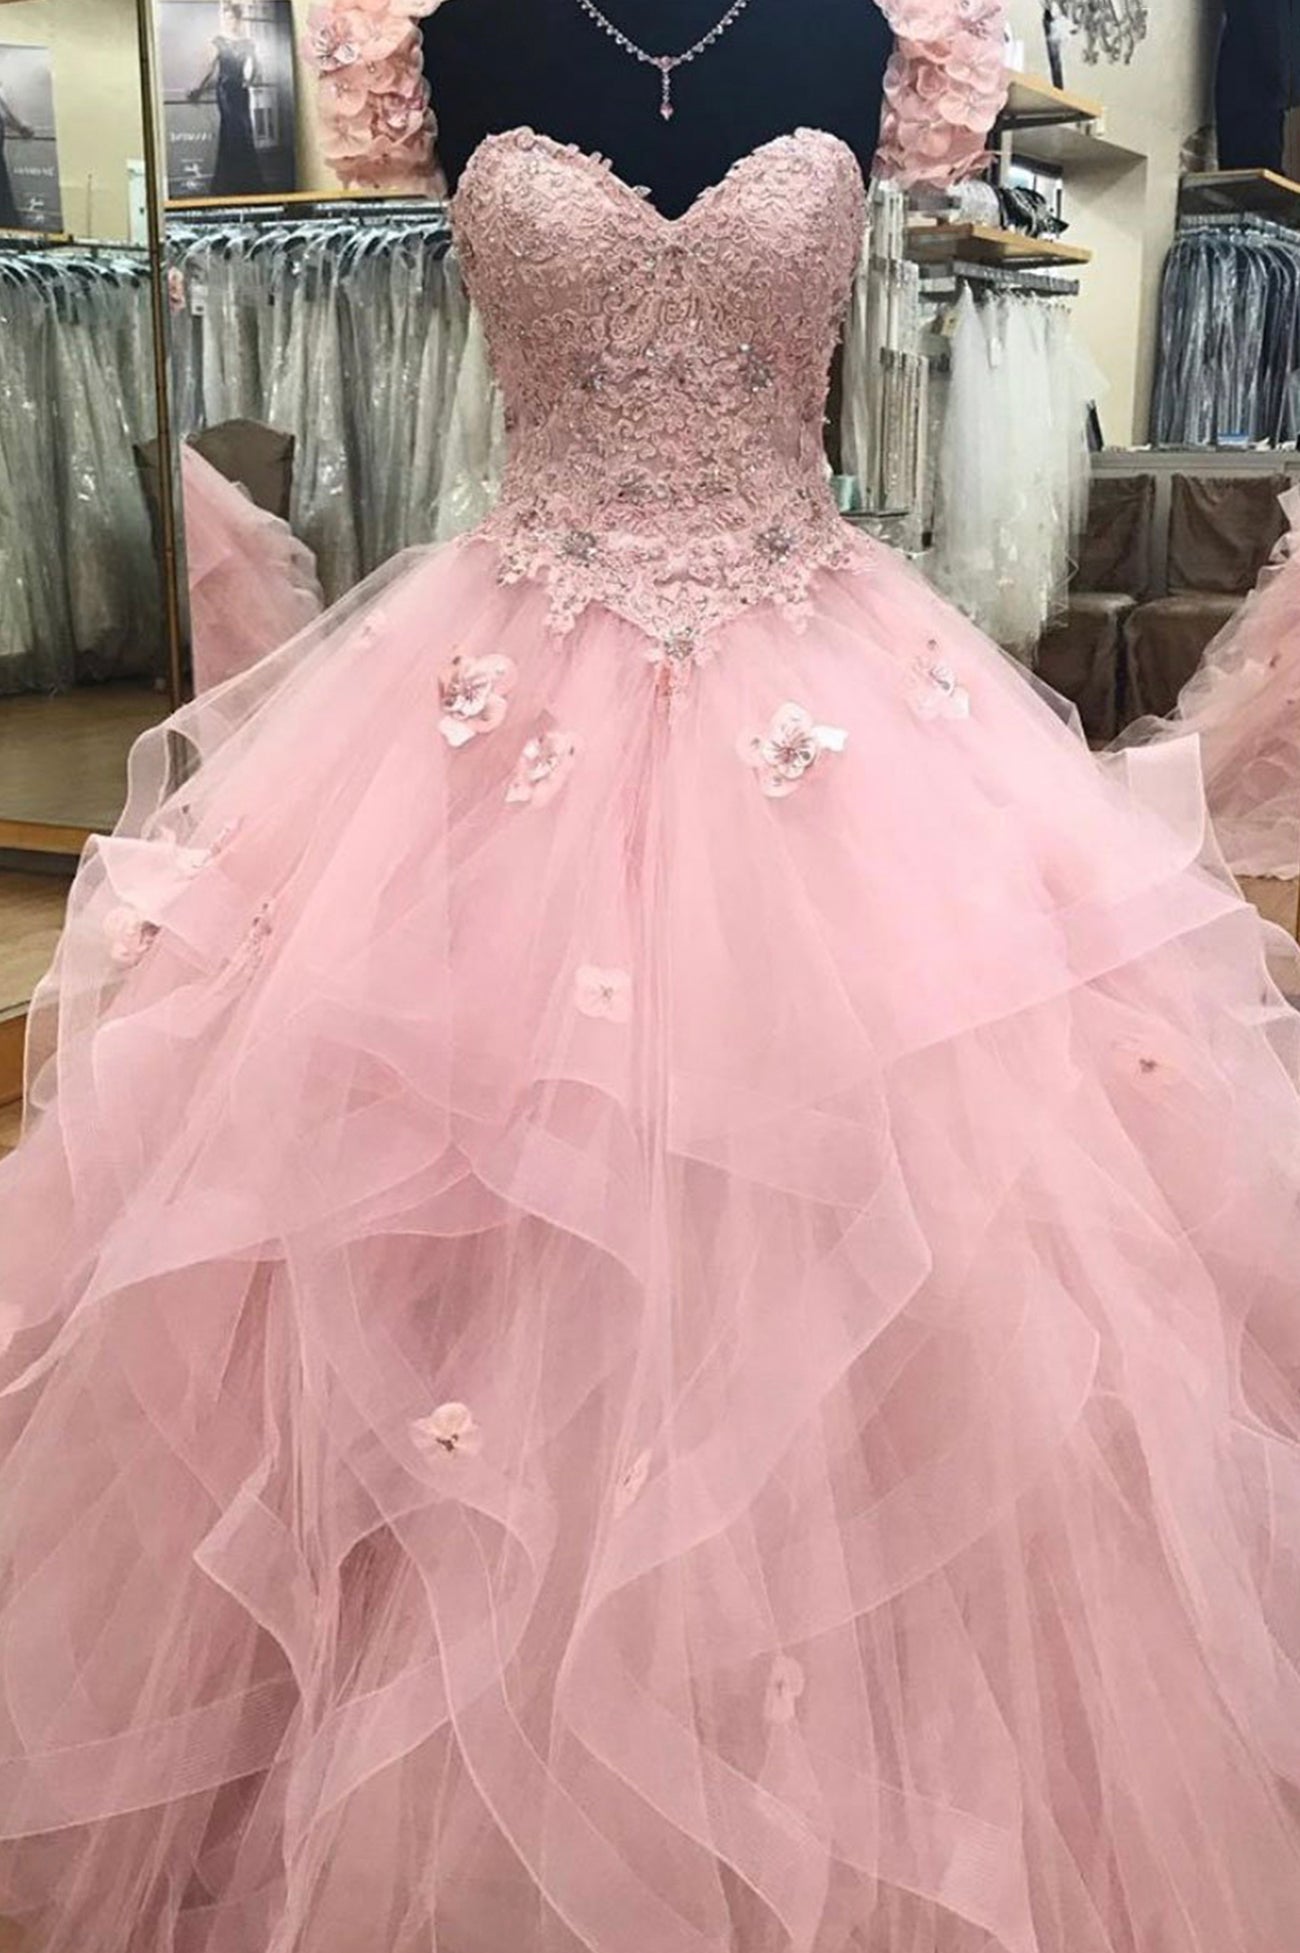 Pink Tulle Lace Long Ball Gown, A-Line Strapless Evening Dress Outfits For Women Sweet 16 Dress